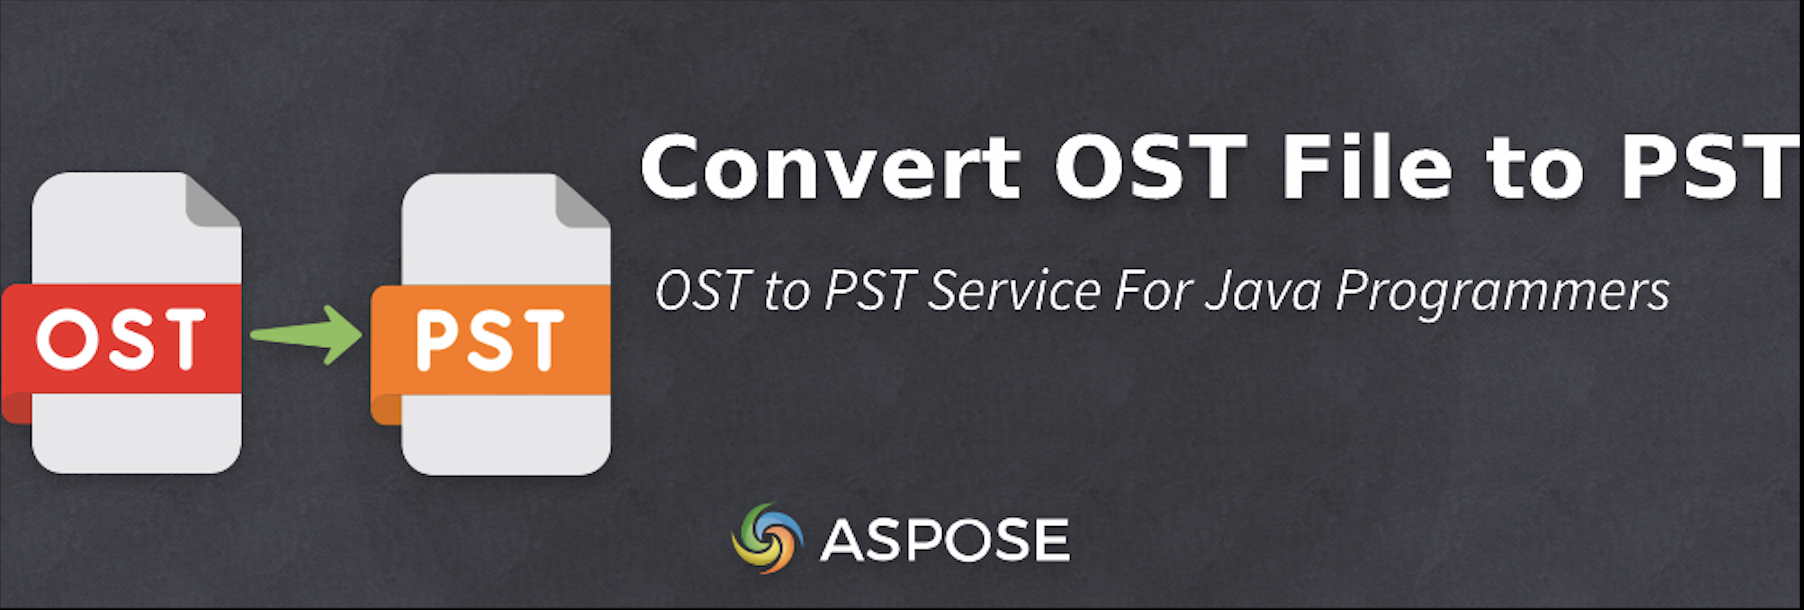 Convert OST Files to PST in Java - Free OST to PST Converter